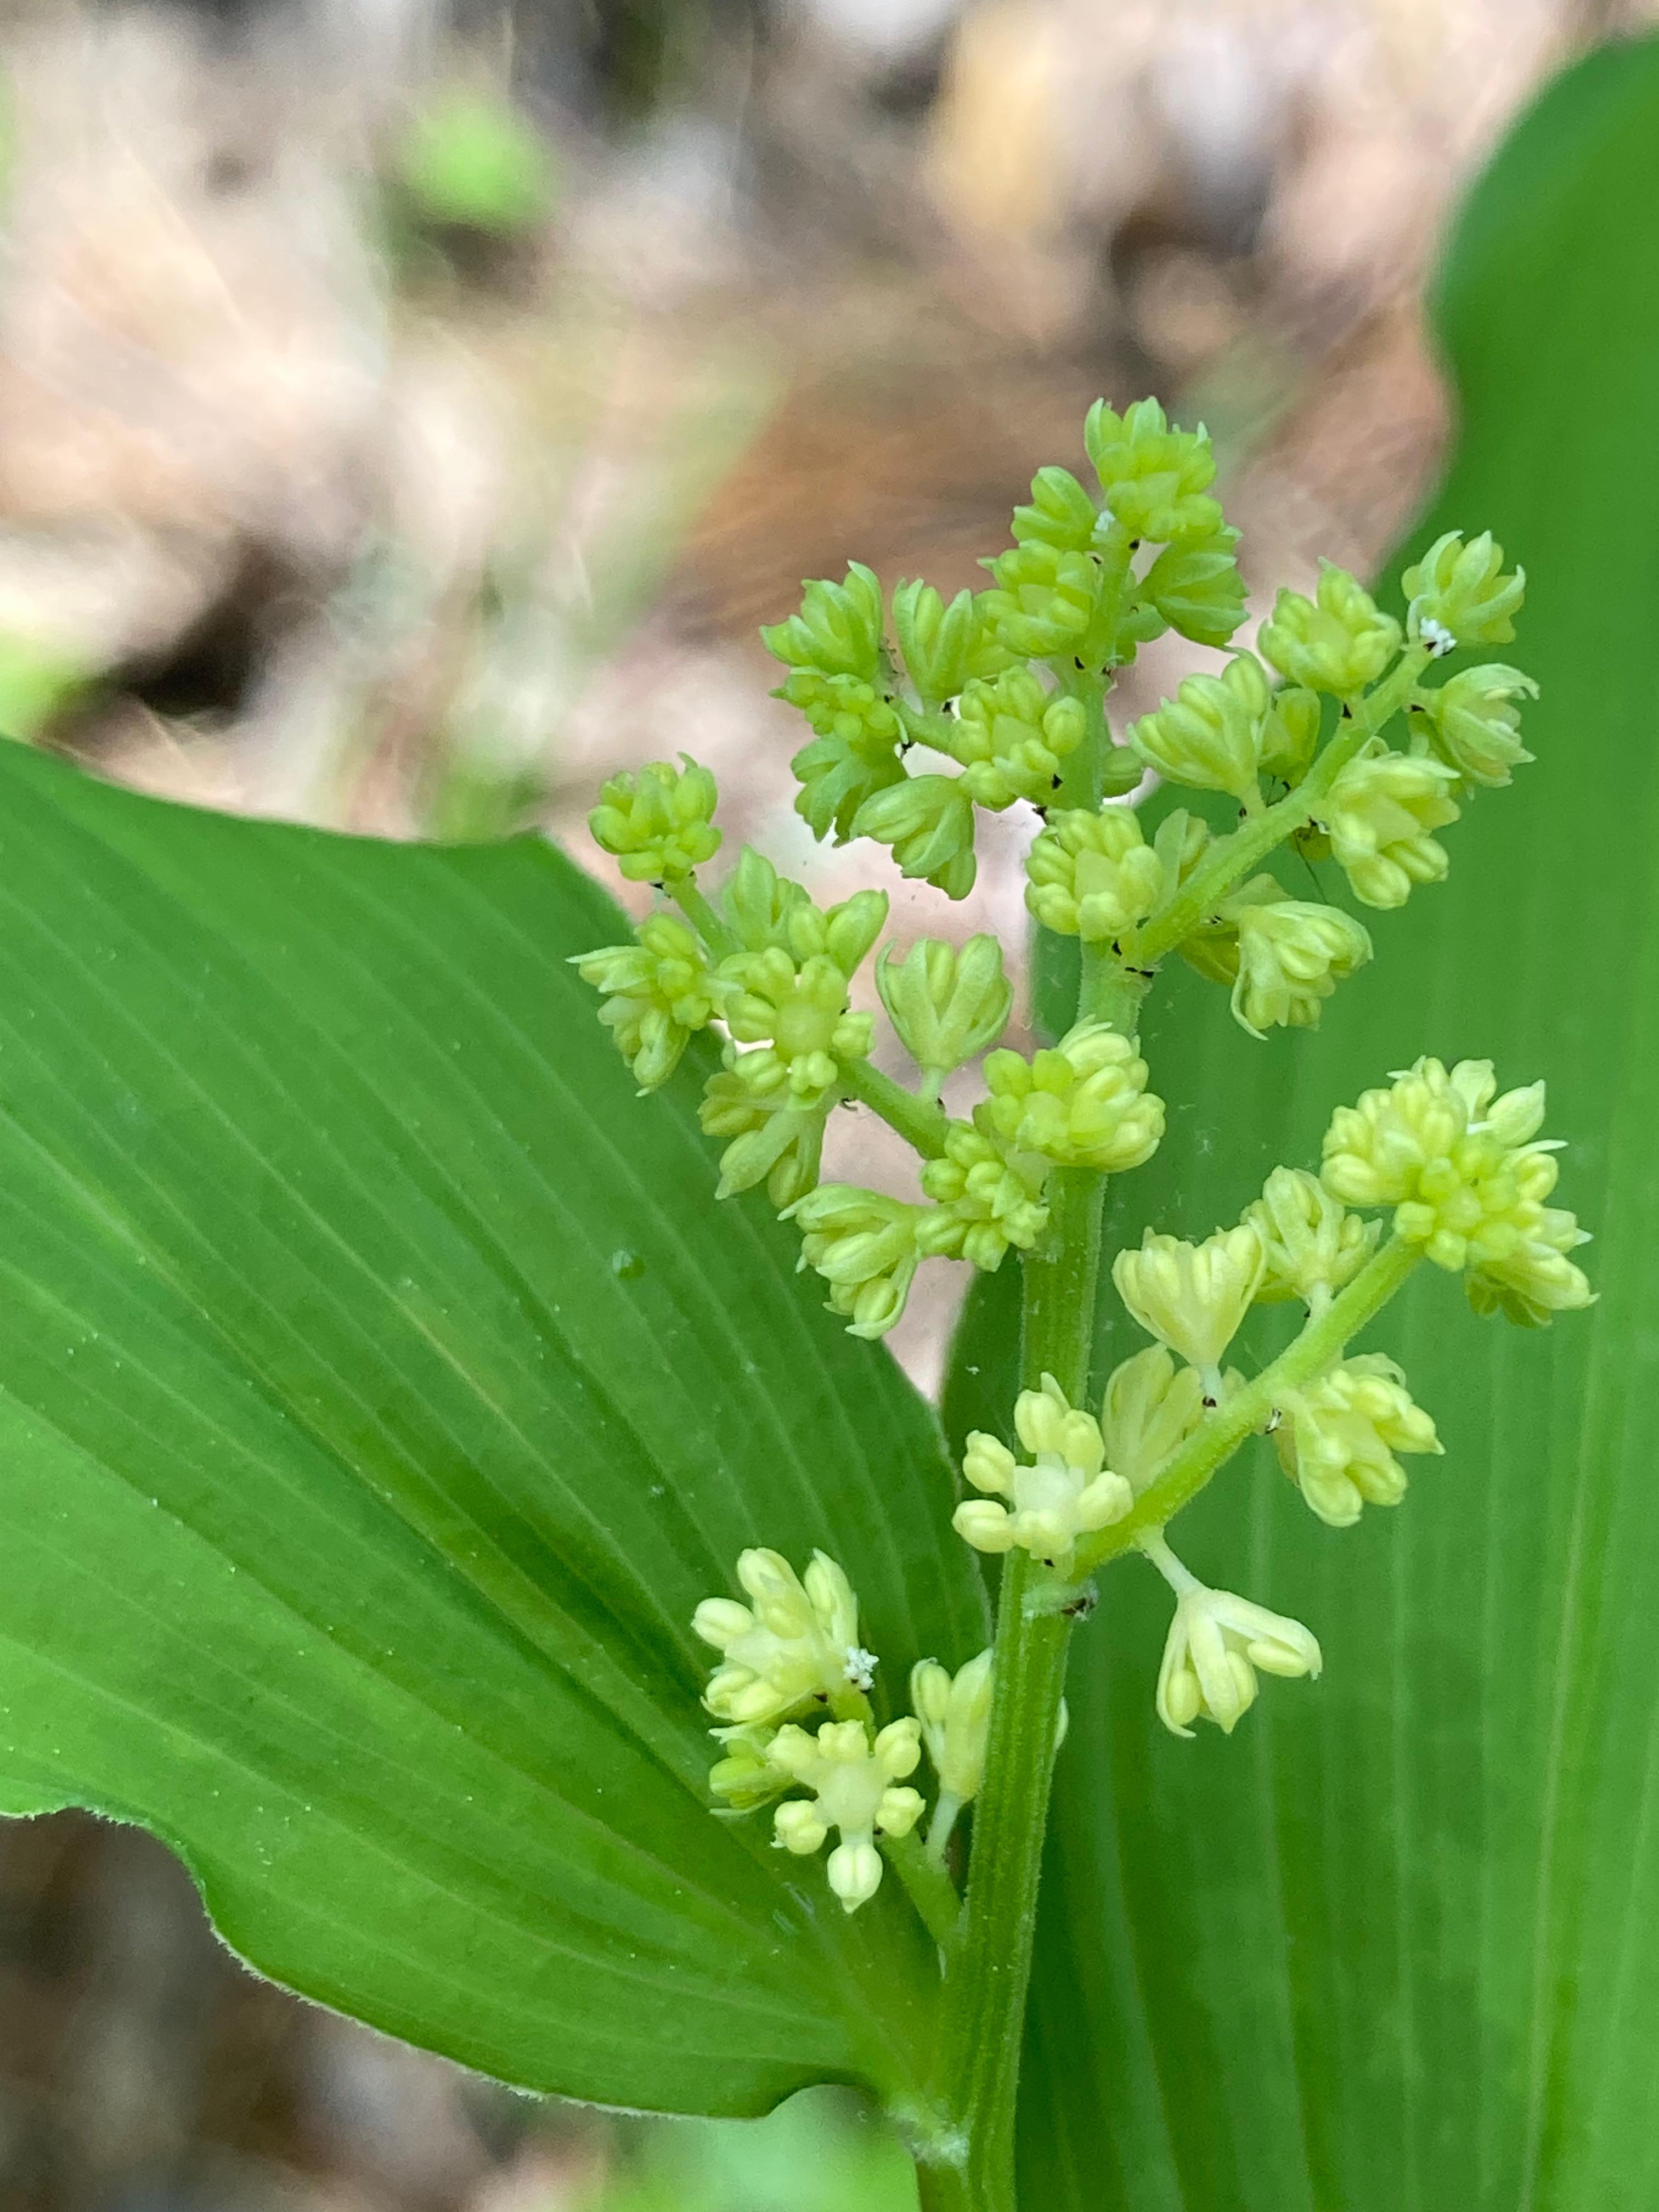 The Scientific Name is Maianthemum racemosum [= Maianthemum racemosum ssp. racemosum, = Smilacina racemosa]. You will likely hear them called Eastern Solomon's-plume, False Solomon's-seal, Feathery False Lily-of-the-valley. This picture shows the Close-up of flowers beginning to open. of Maianthemum racemosum [= Maianthemum racemosum ssp. racemosum, = Smilacina racemosa]